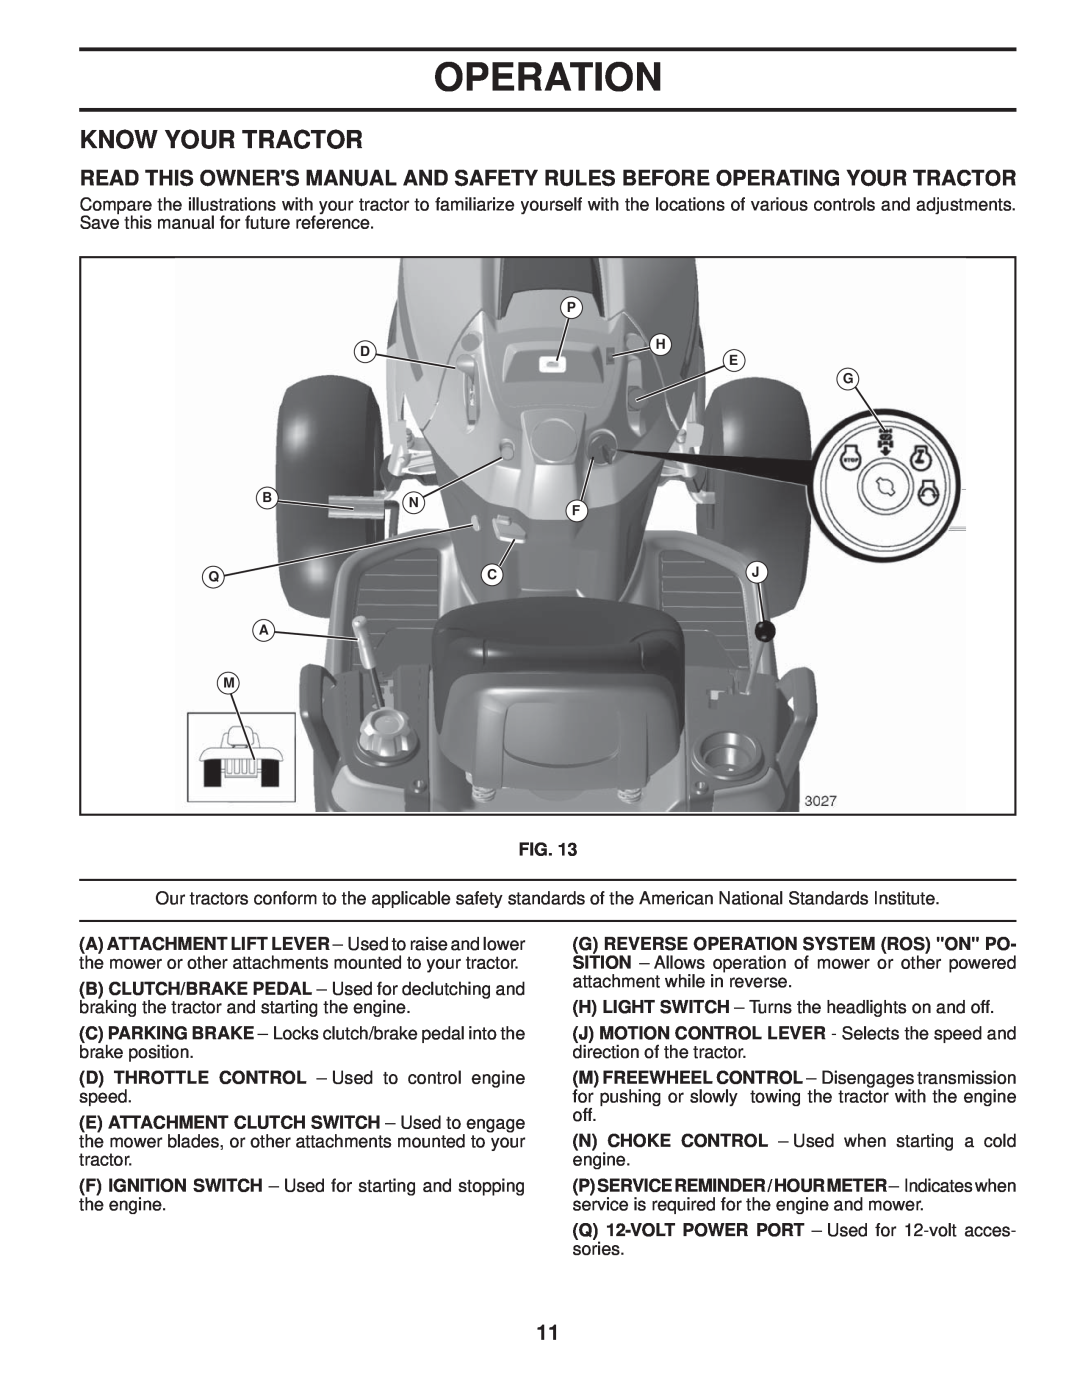 Husqvarna 2754 GLS manual Know Your Tractor, Operation 